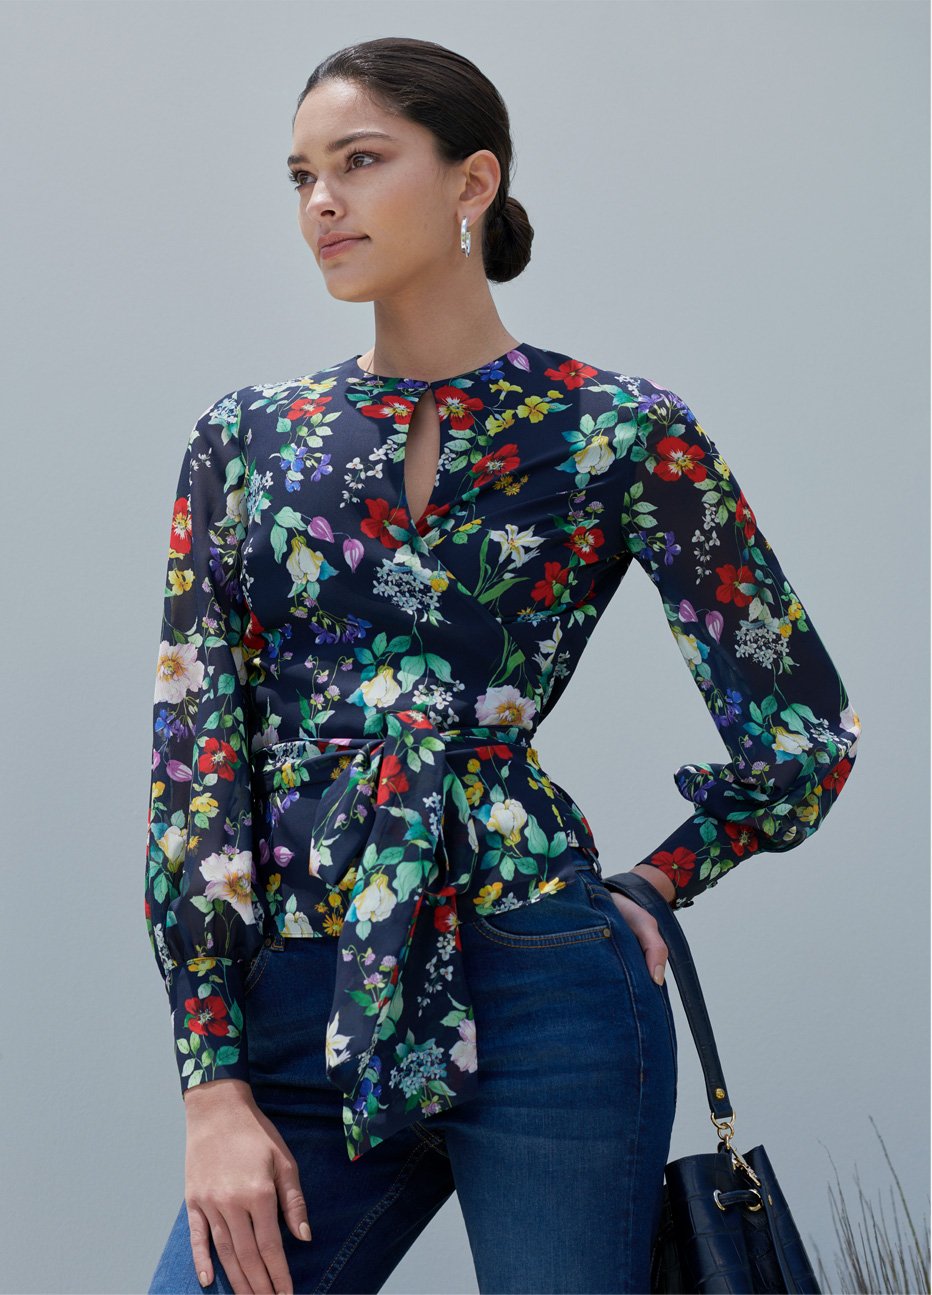  Floral wrap blouse with blue jeans and leather bucket bag by Hobbs.